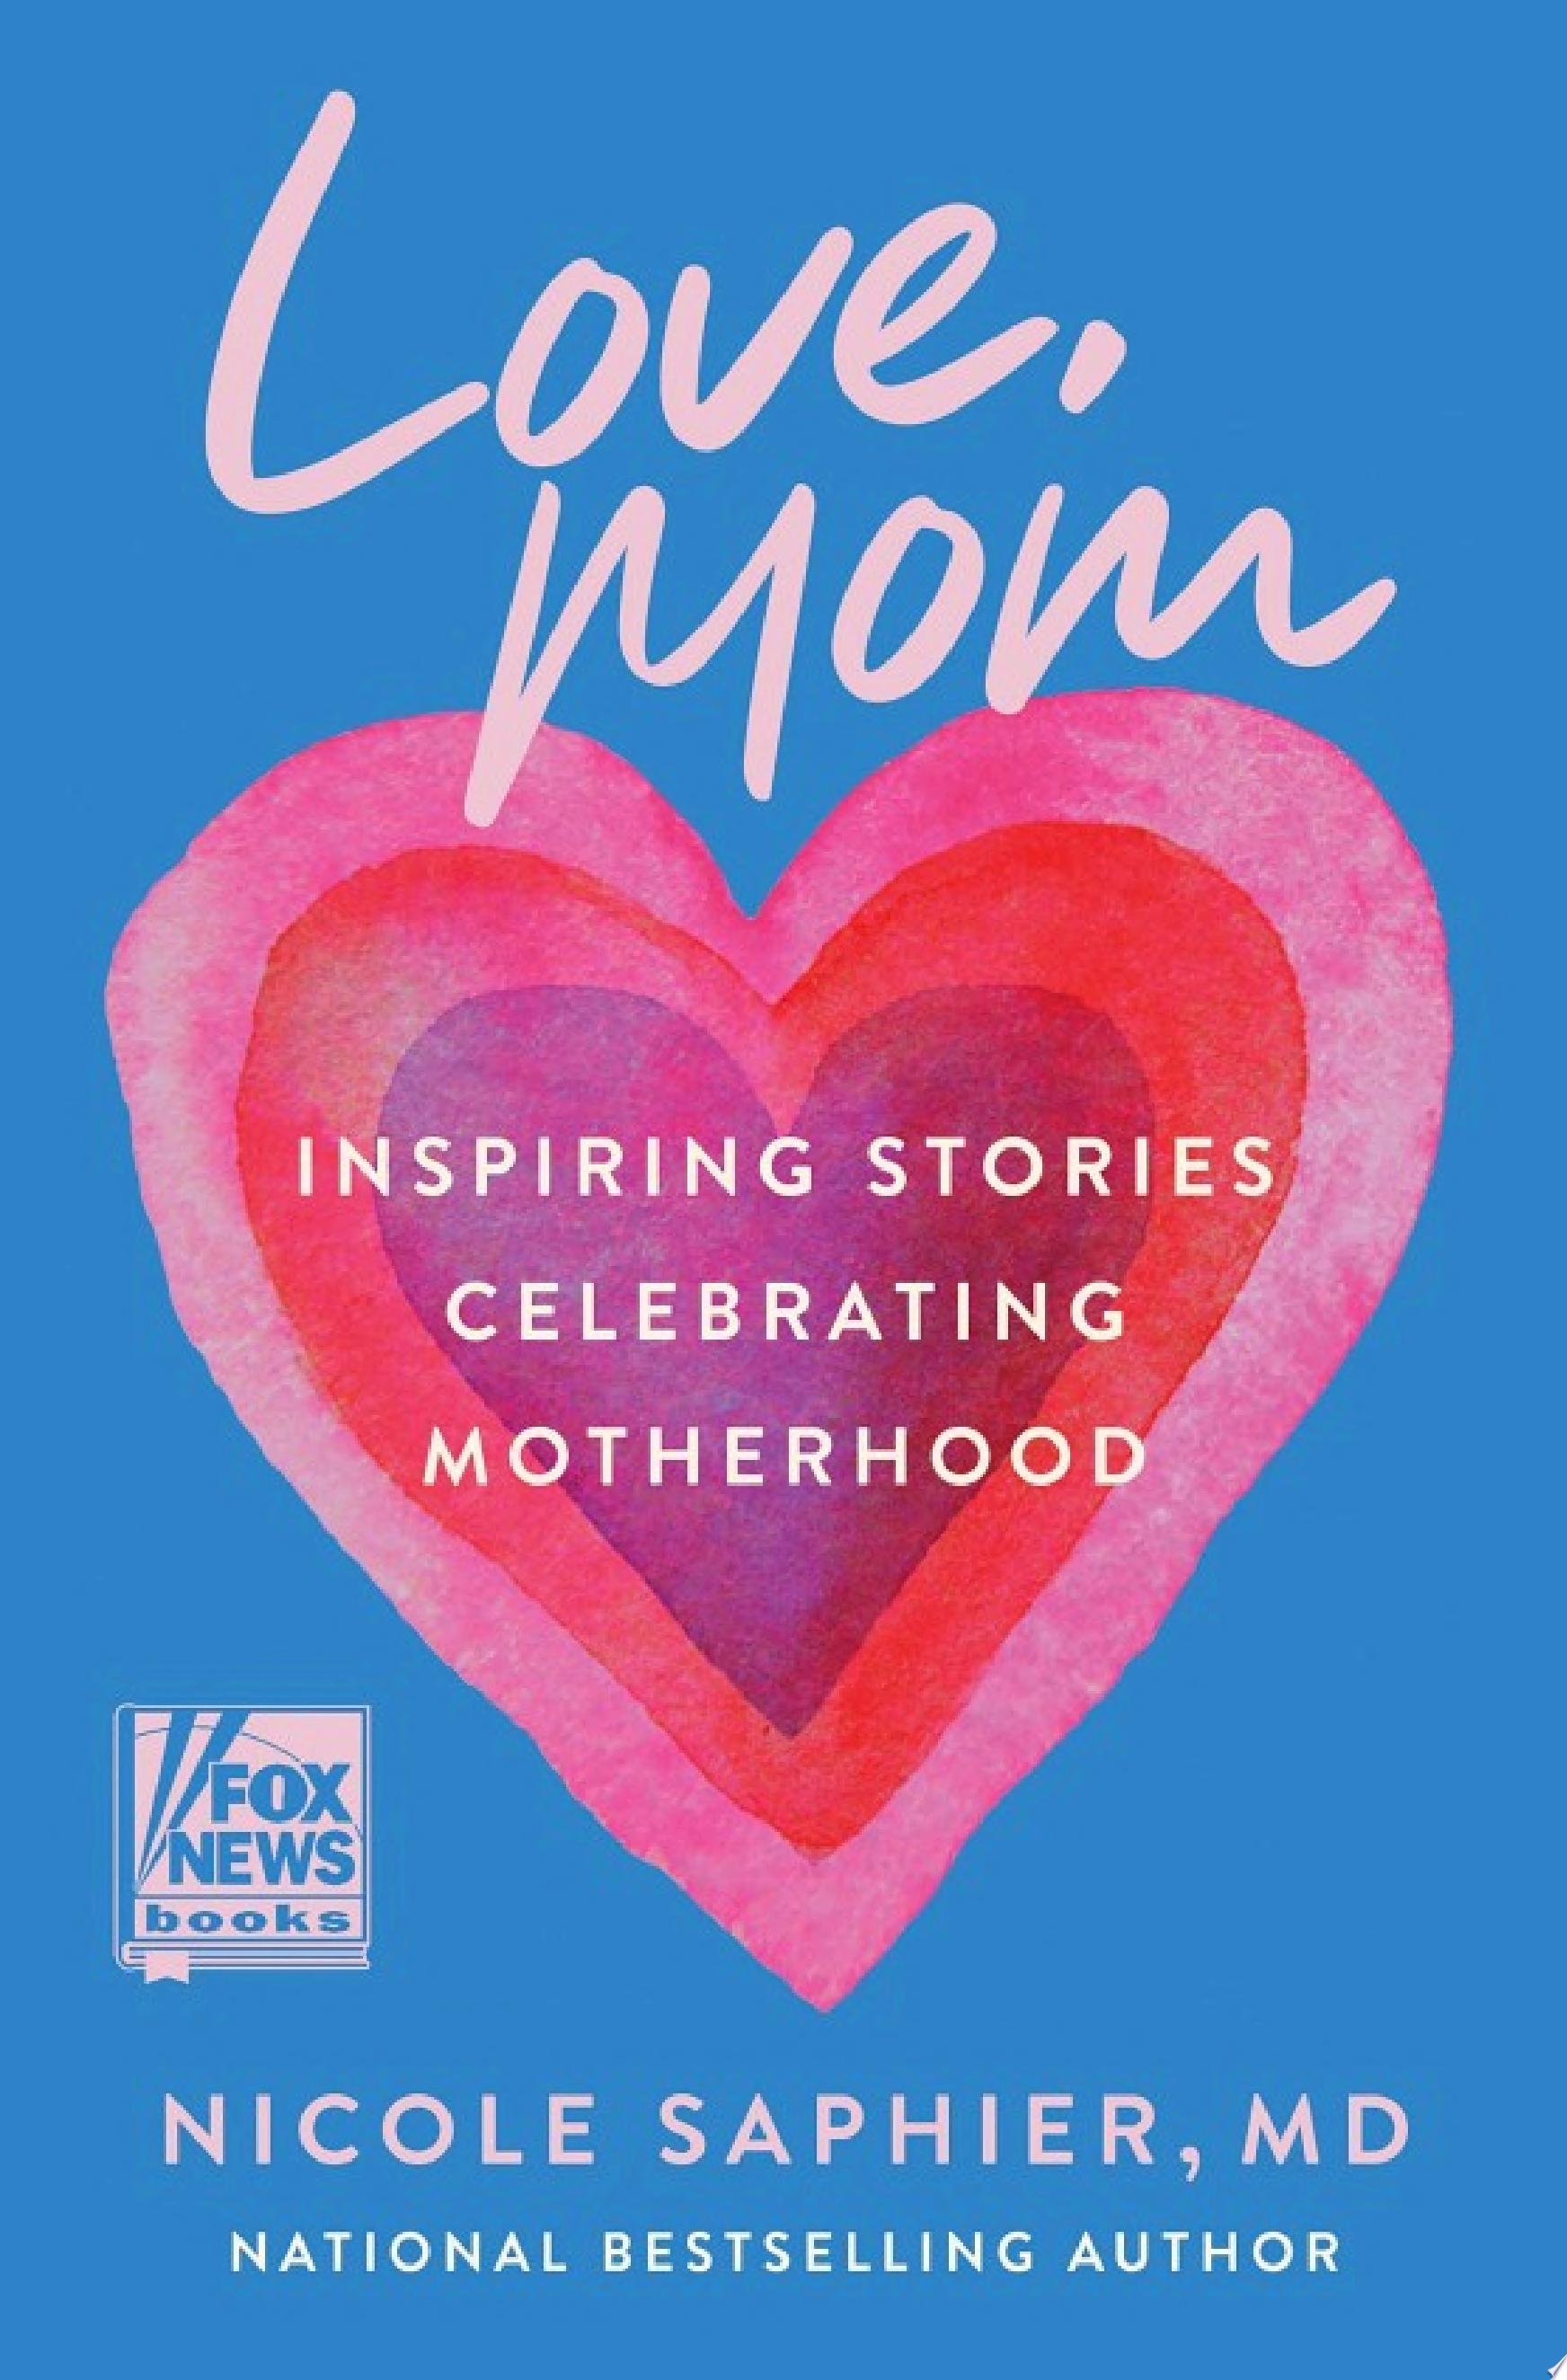 Image for "Love, Mom"